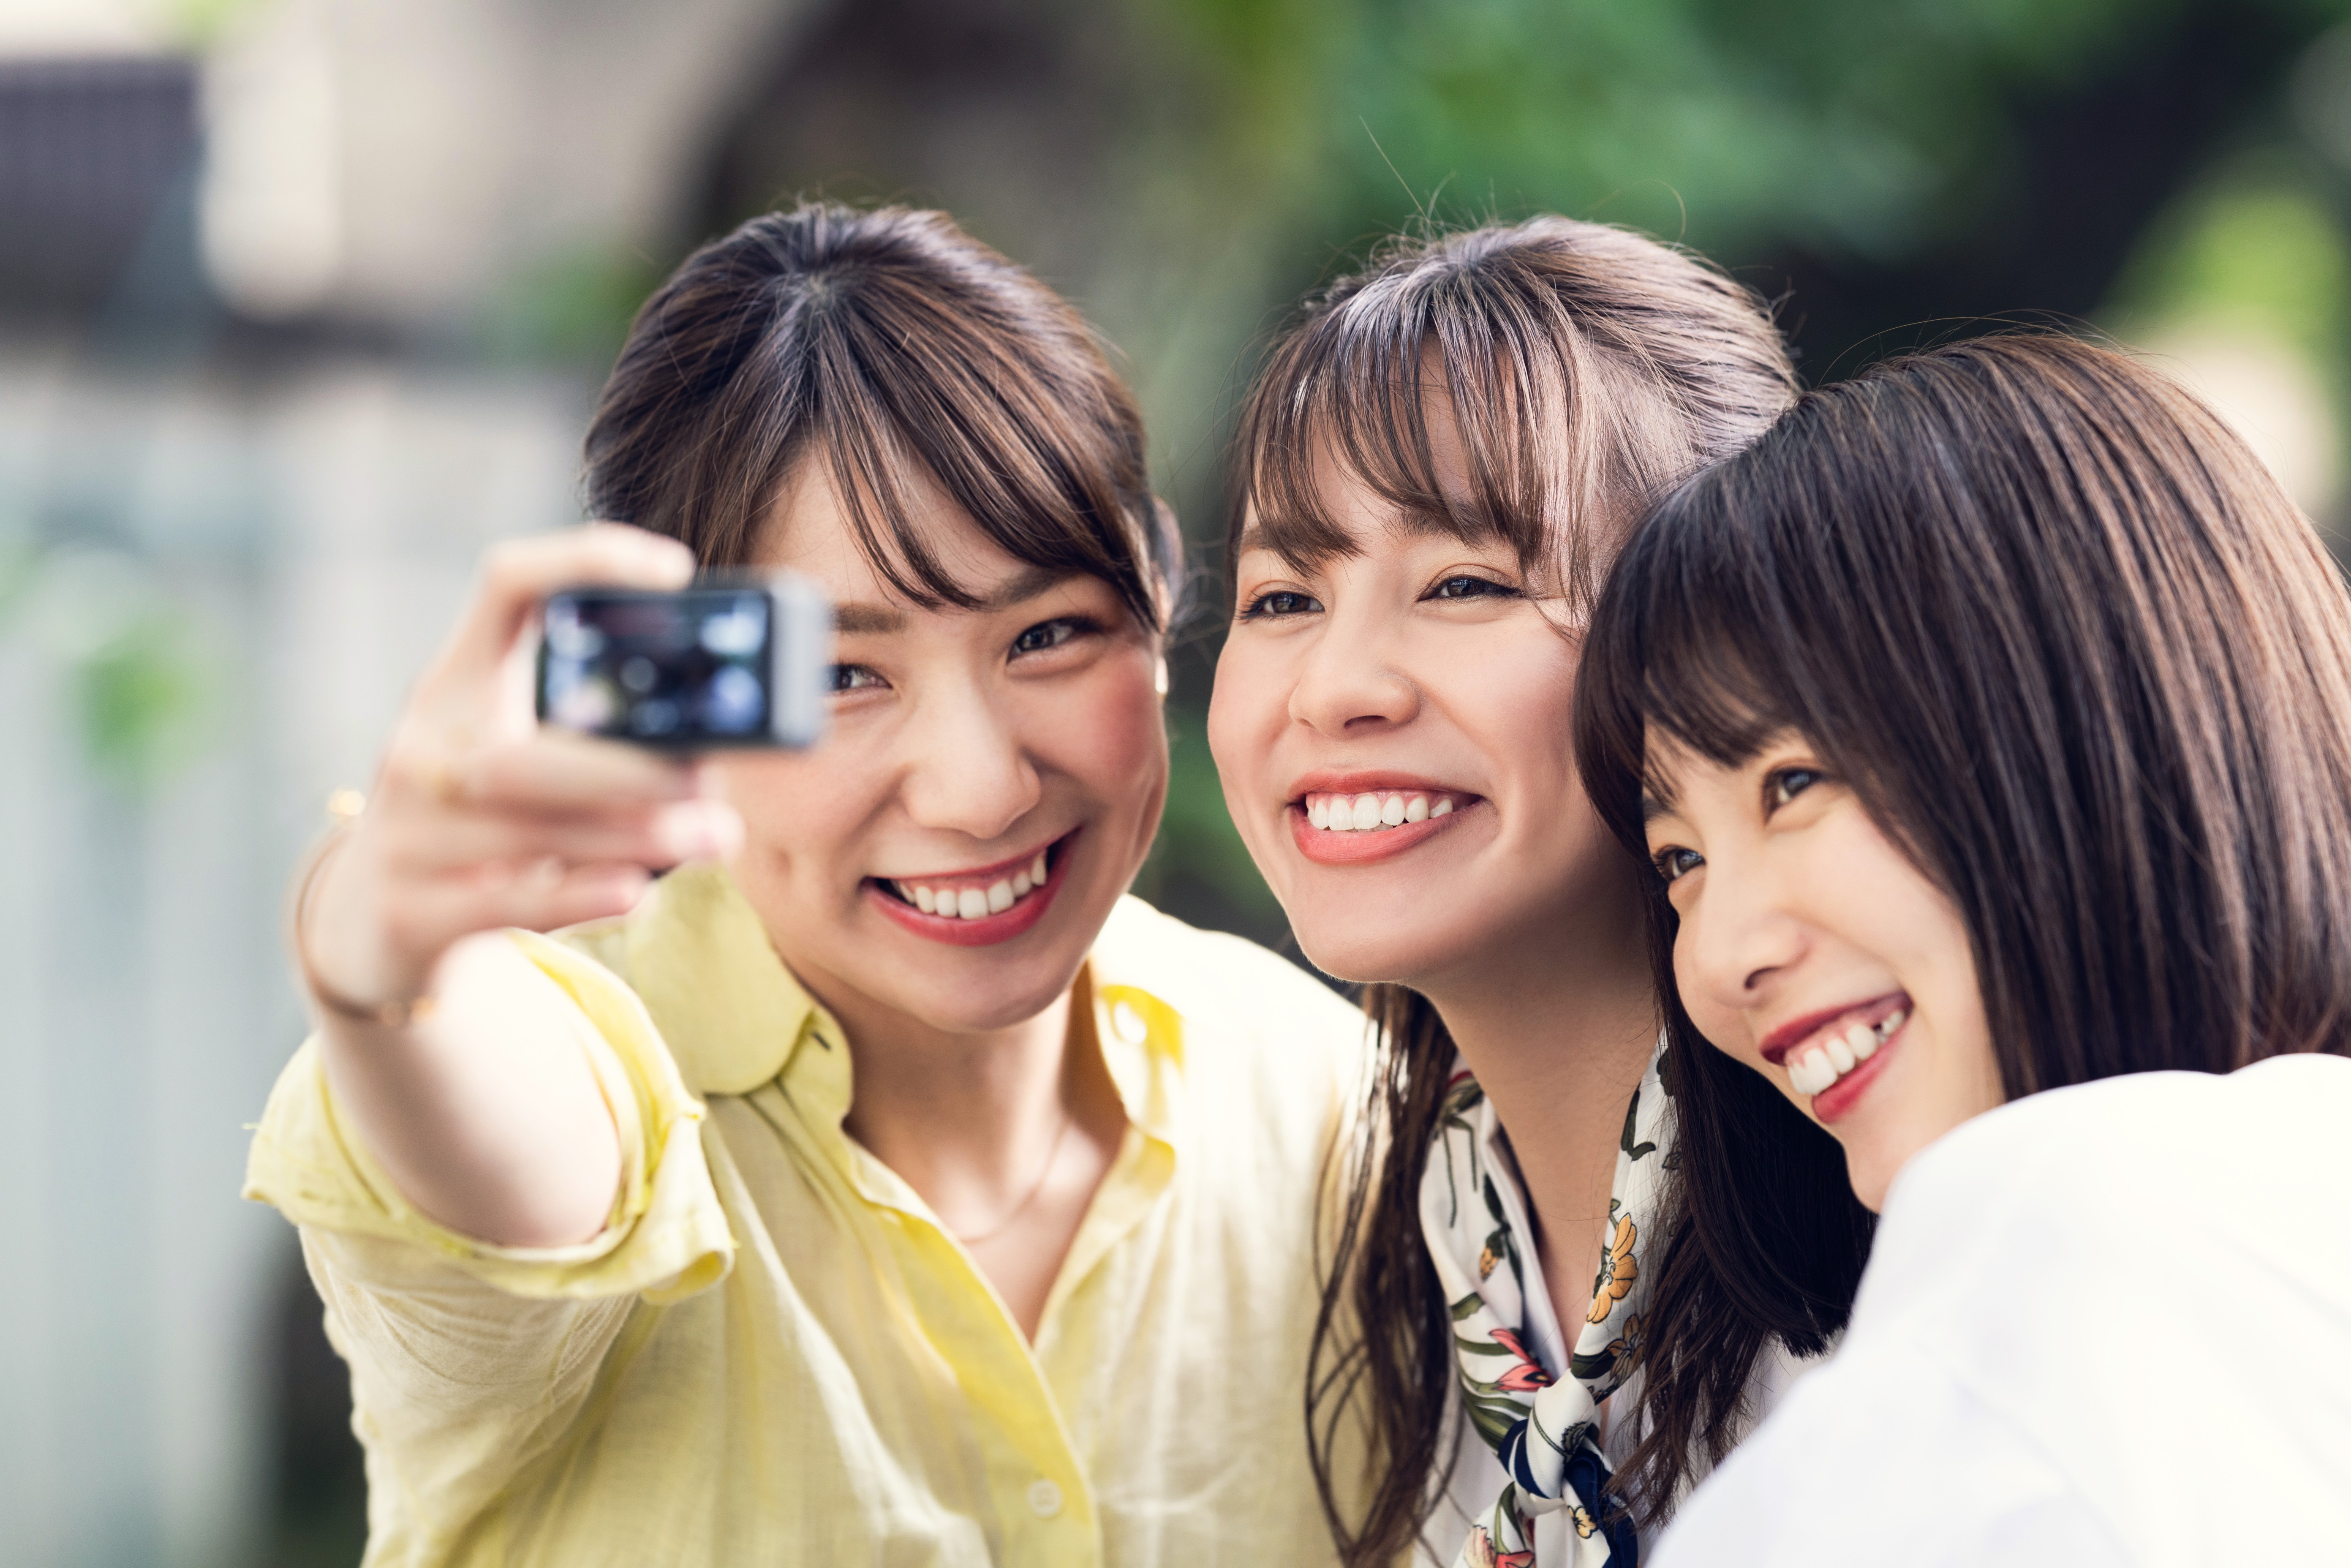 Most Common Reasons for Using Social Media in Japan